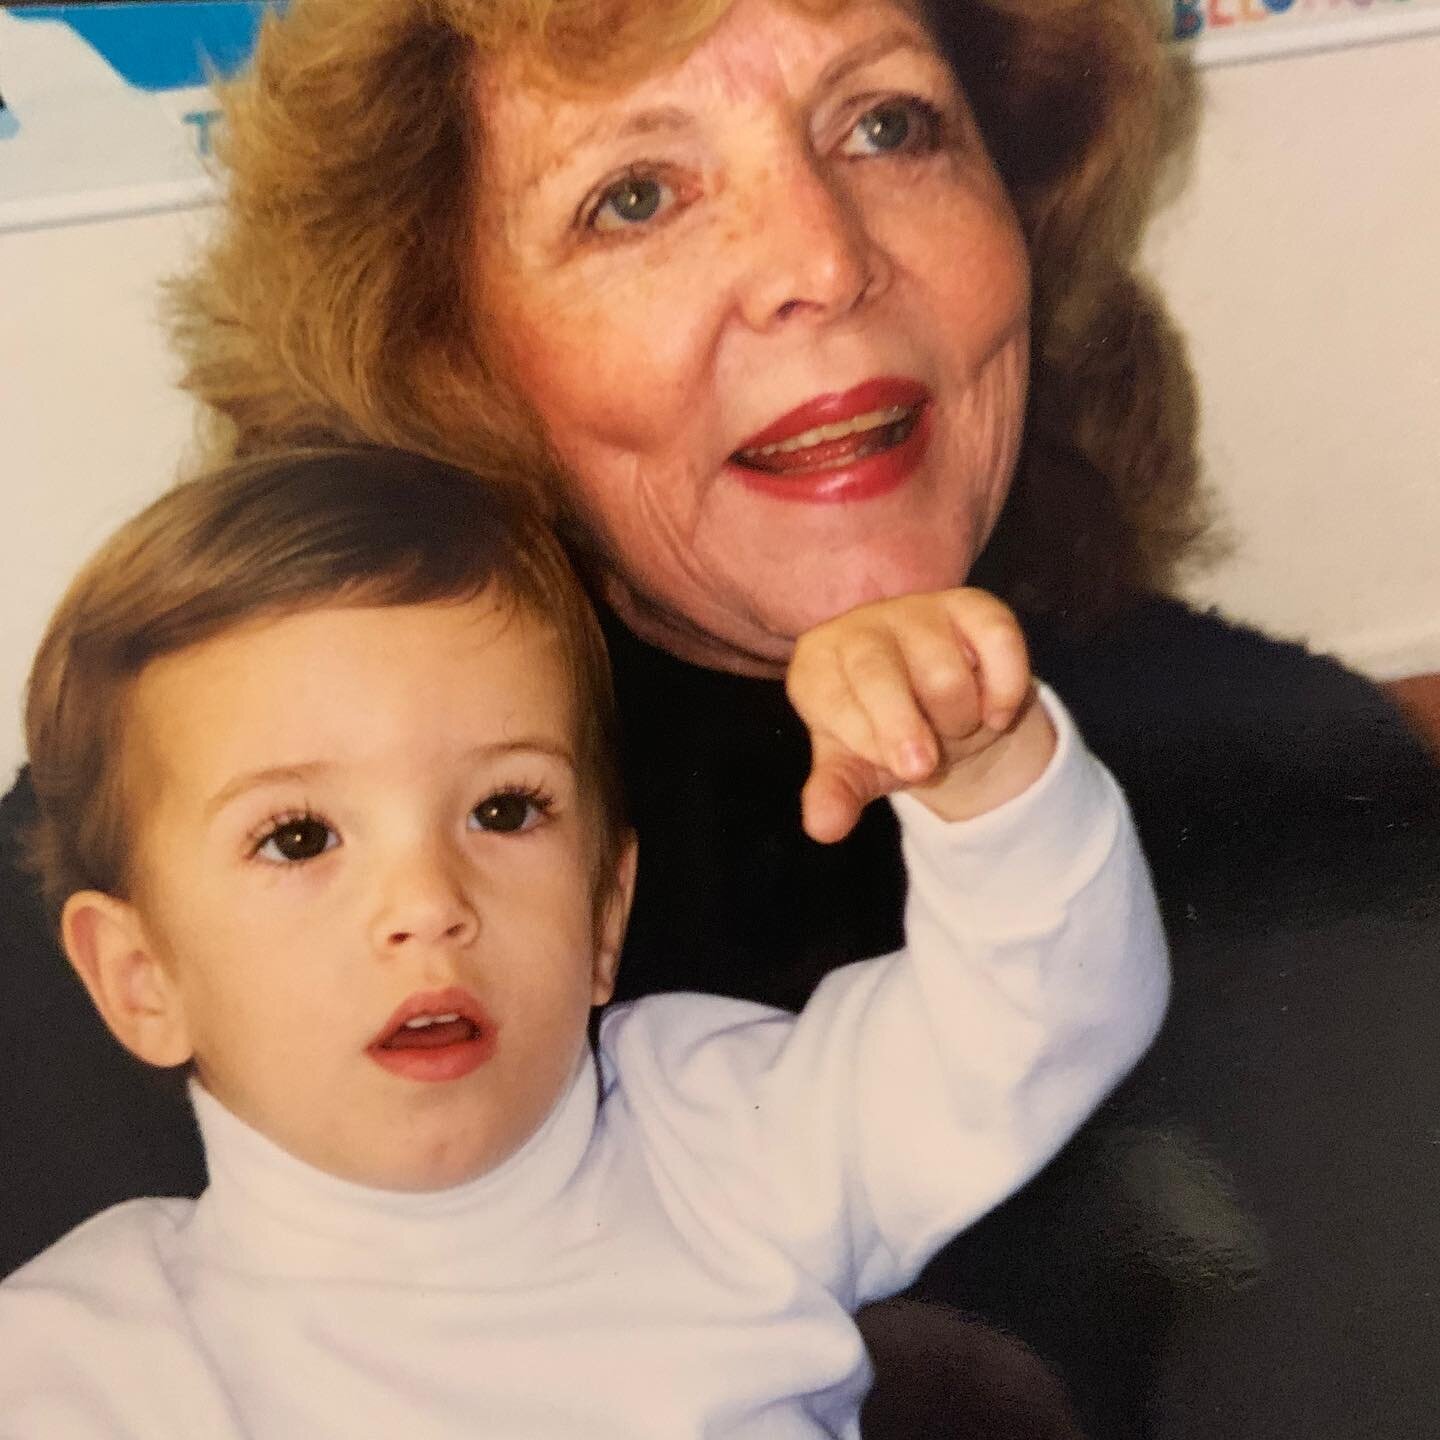 No matter how much you&rsquo;re prepared you&rsquo;re not quite ready. You lived a full life grandma, but there&rsquo;s a lot I wish I could still ask you, like about growing up near San Francisco, so I wrote a song last night about it. Hope to see y